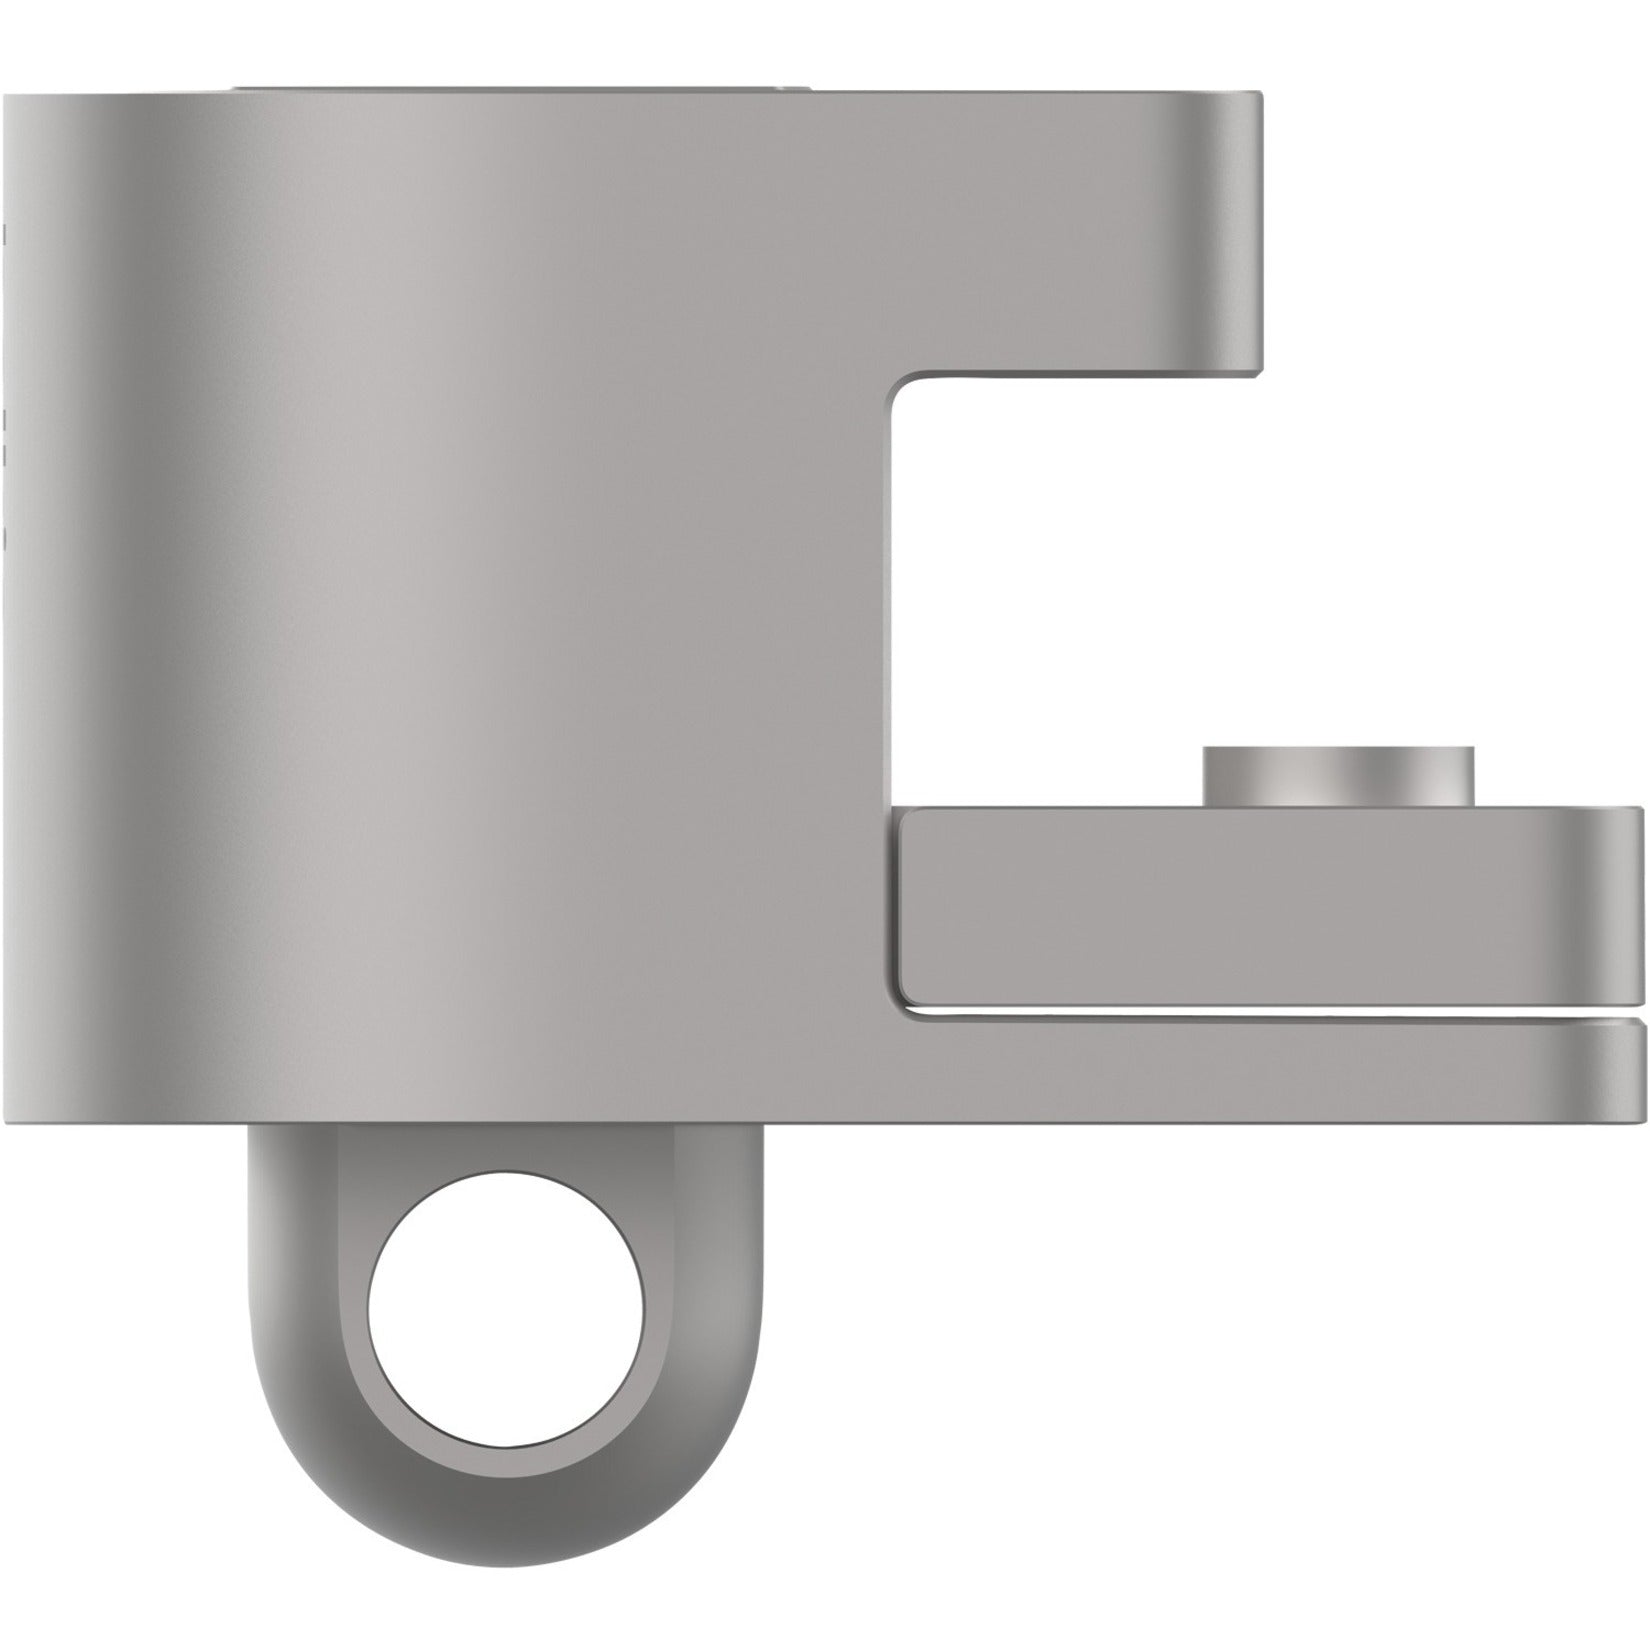 Belkin F8E969BT Security Cable Lock Adapter for Mac Pro, Protect Your Mac Pro with this Stainless Steel Lock Adapter